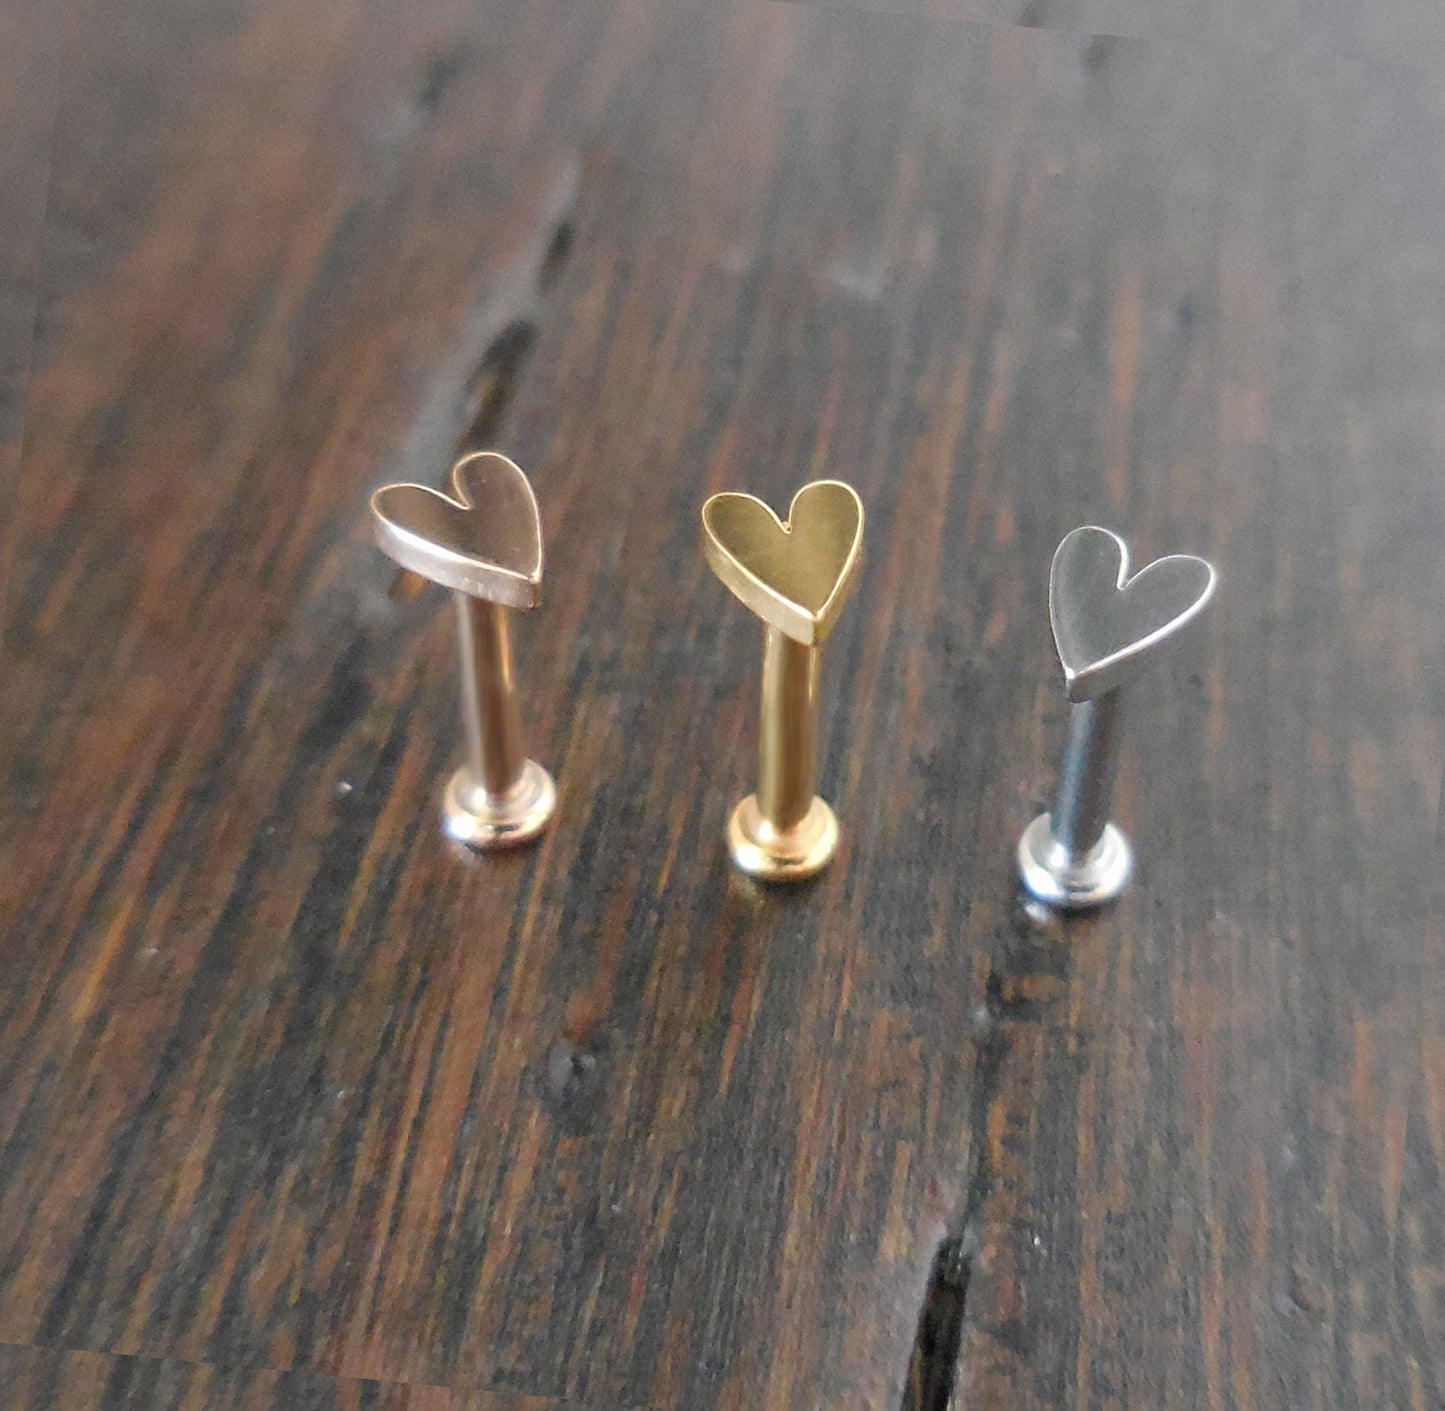 Heart Mini Cartilage Earring Threadless Push Pin Conch Labret Tragus Helix Gold Tone Nose Stud